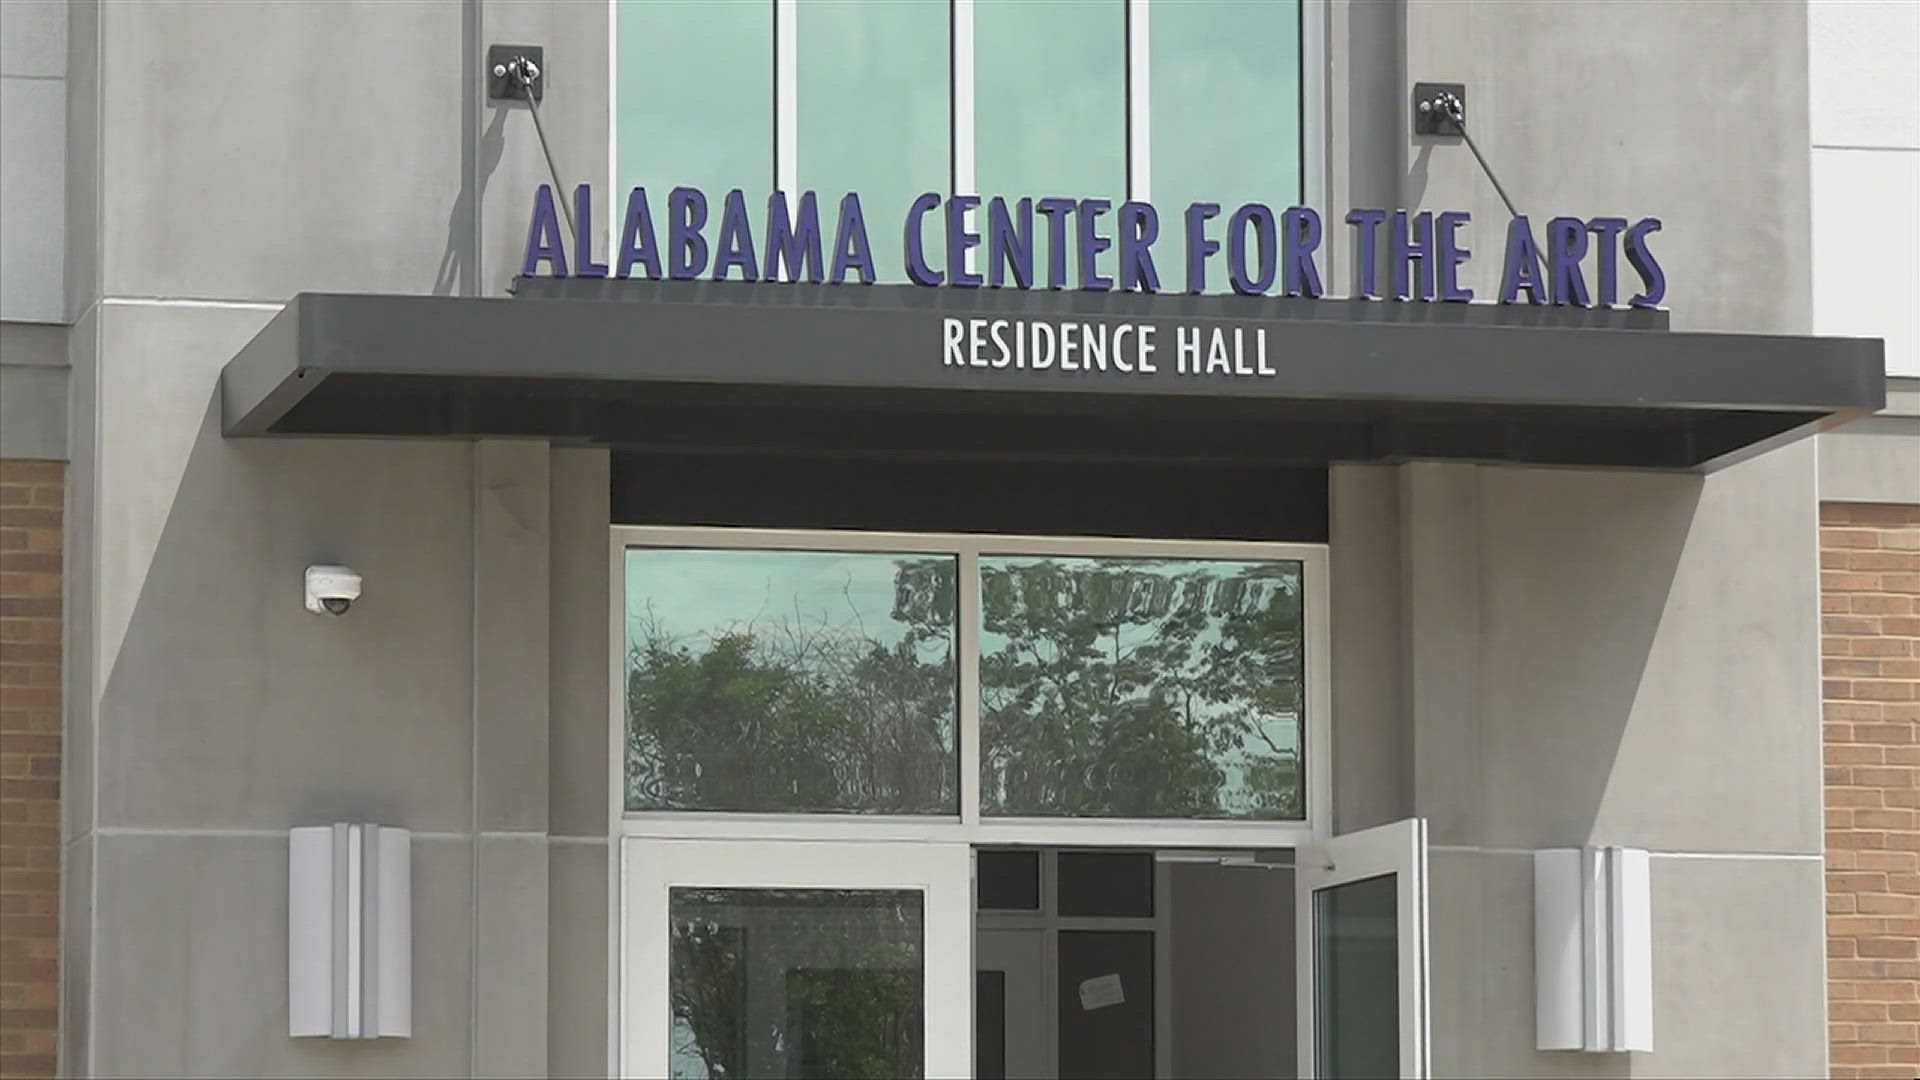 Students at the Athens State and Calhoun Community Colleges now have a residence option that could cut down on commute times.